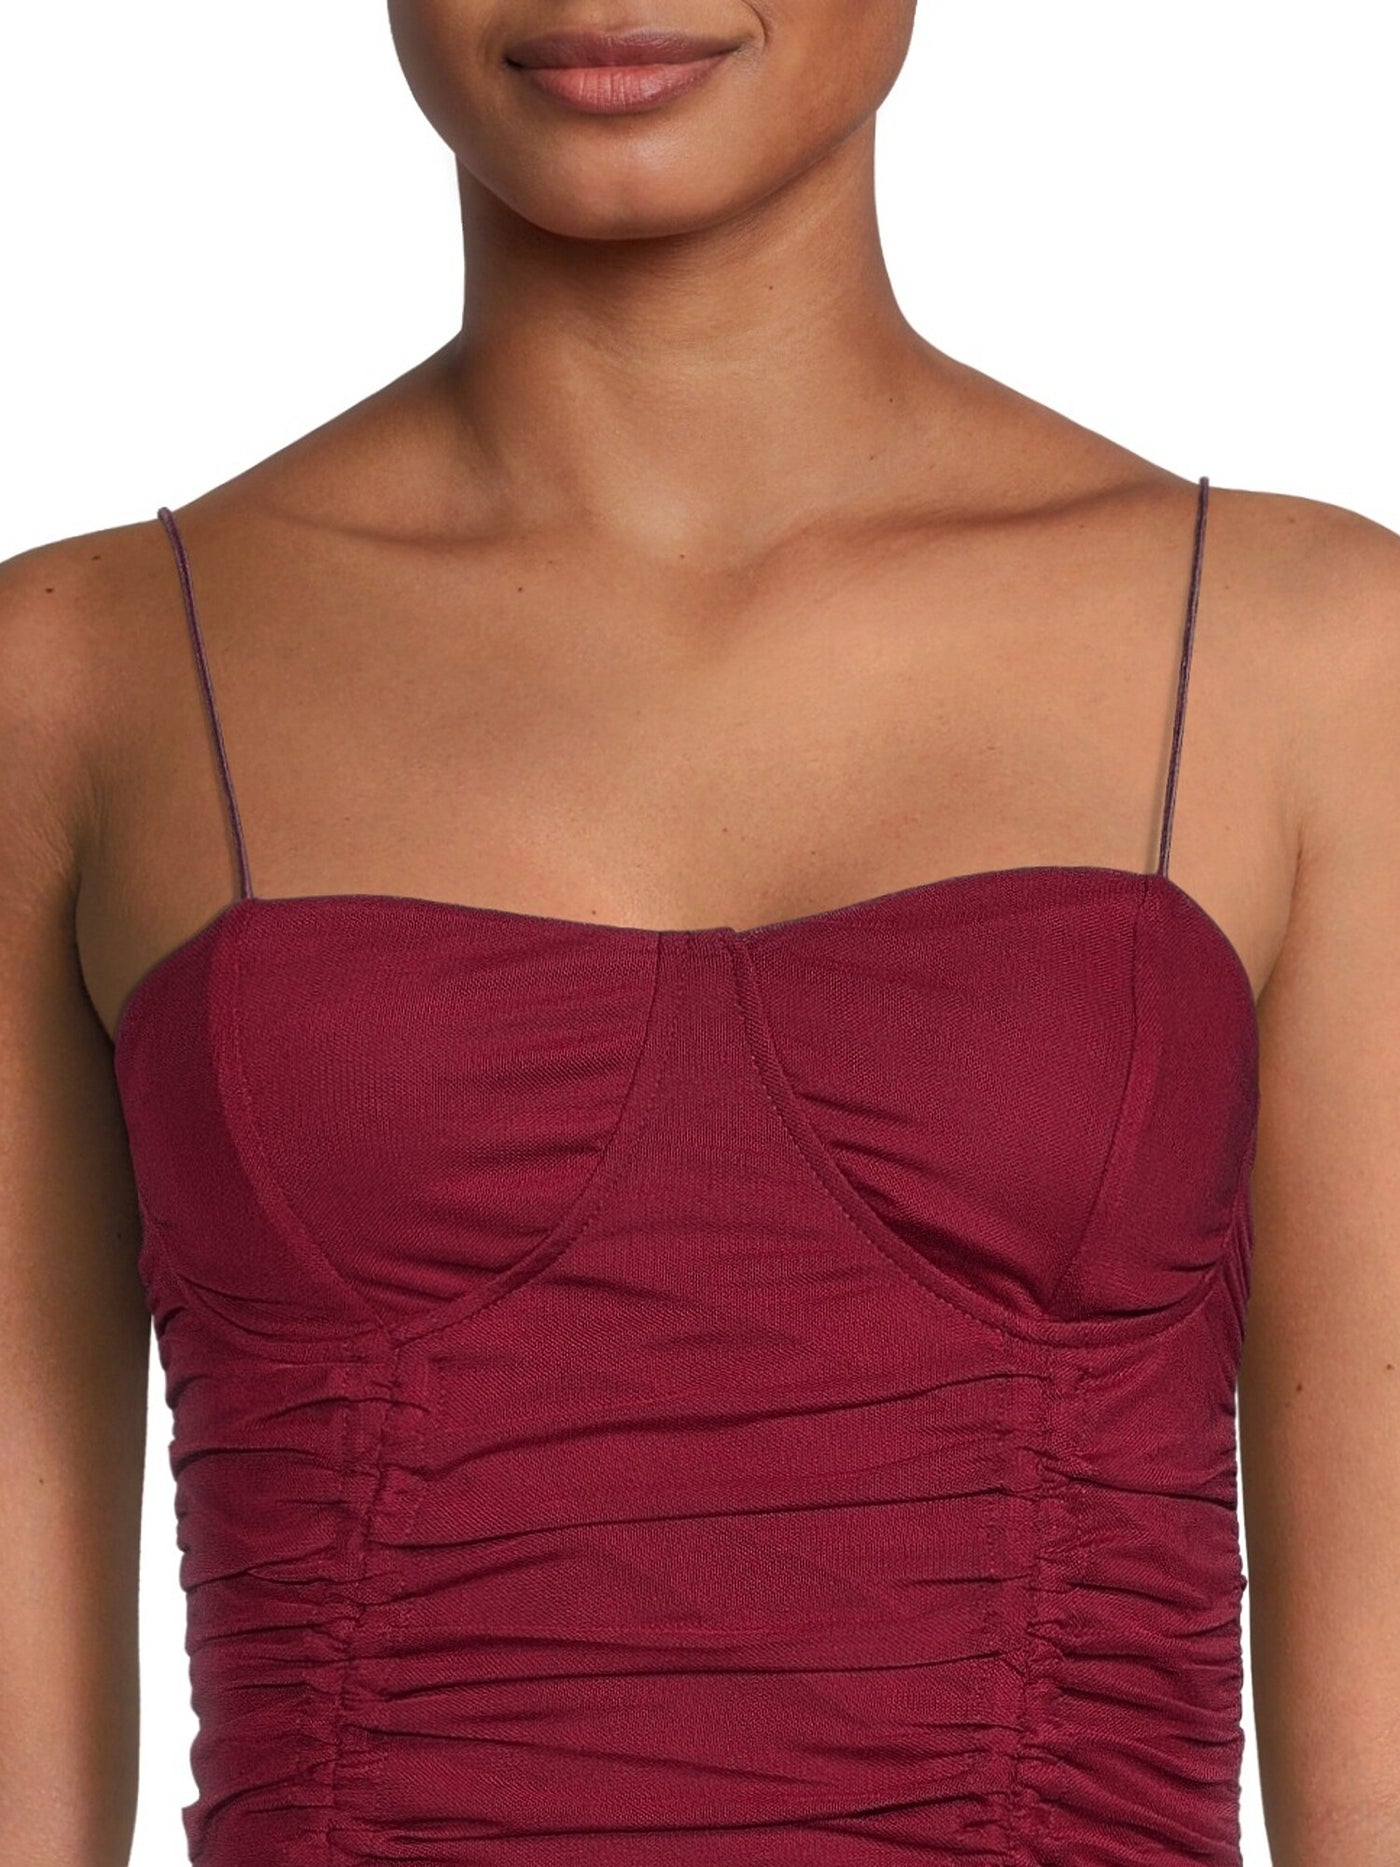 ALMOST FAMOUS Womens Maroon Sheer Ruched Lined Tie Hem Sleeveless Sweetheart Neckline Above The Knee Party Body Con Dress Juniors XL